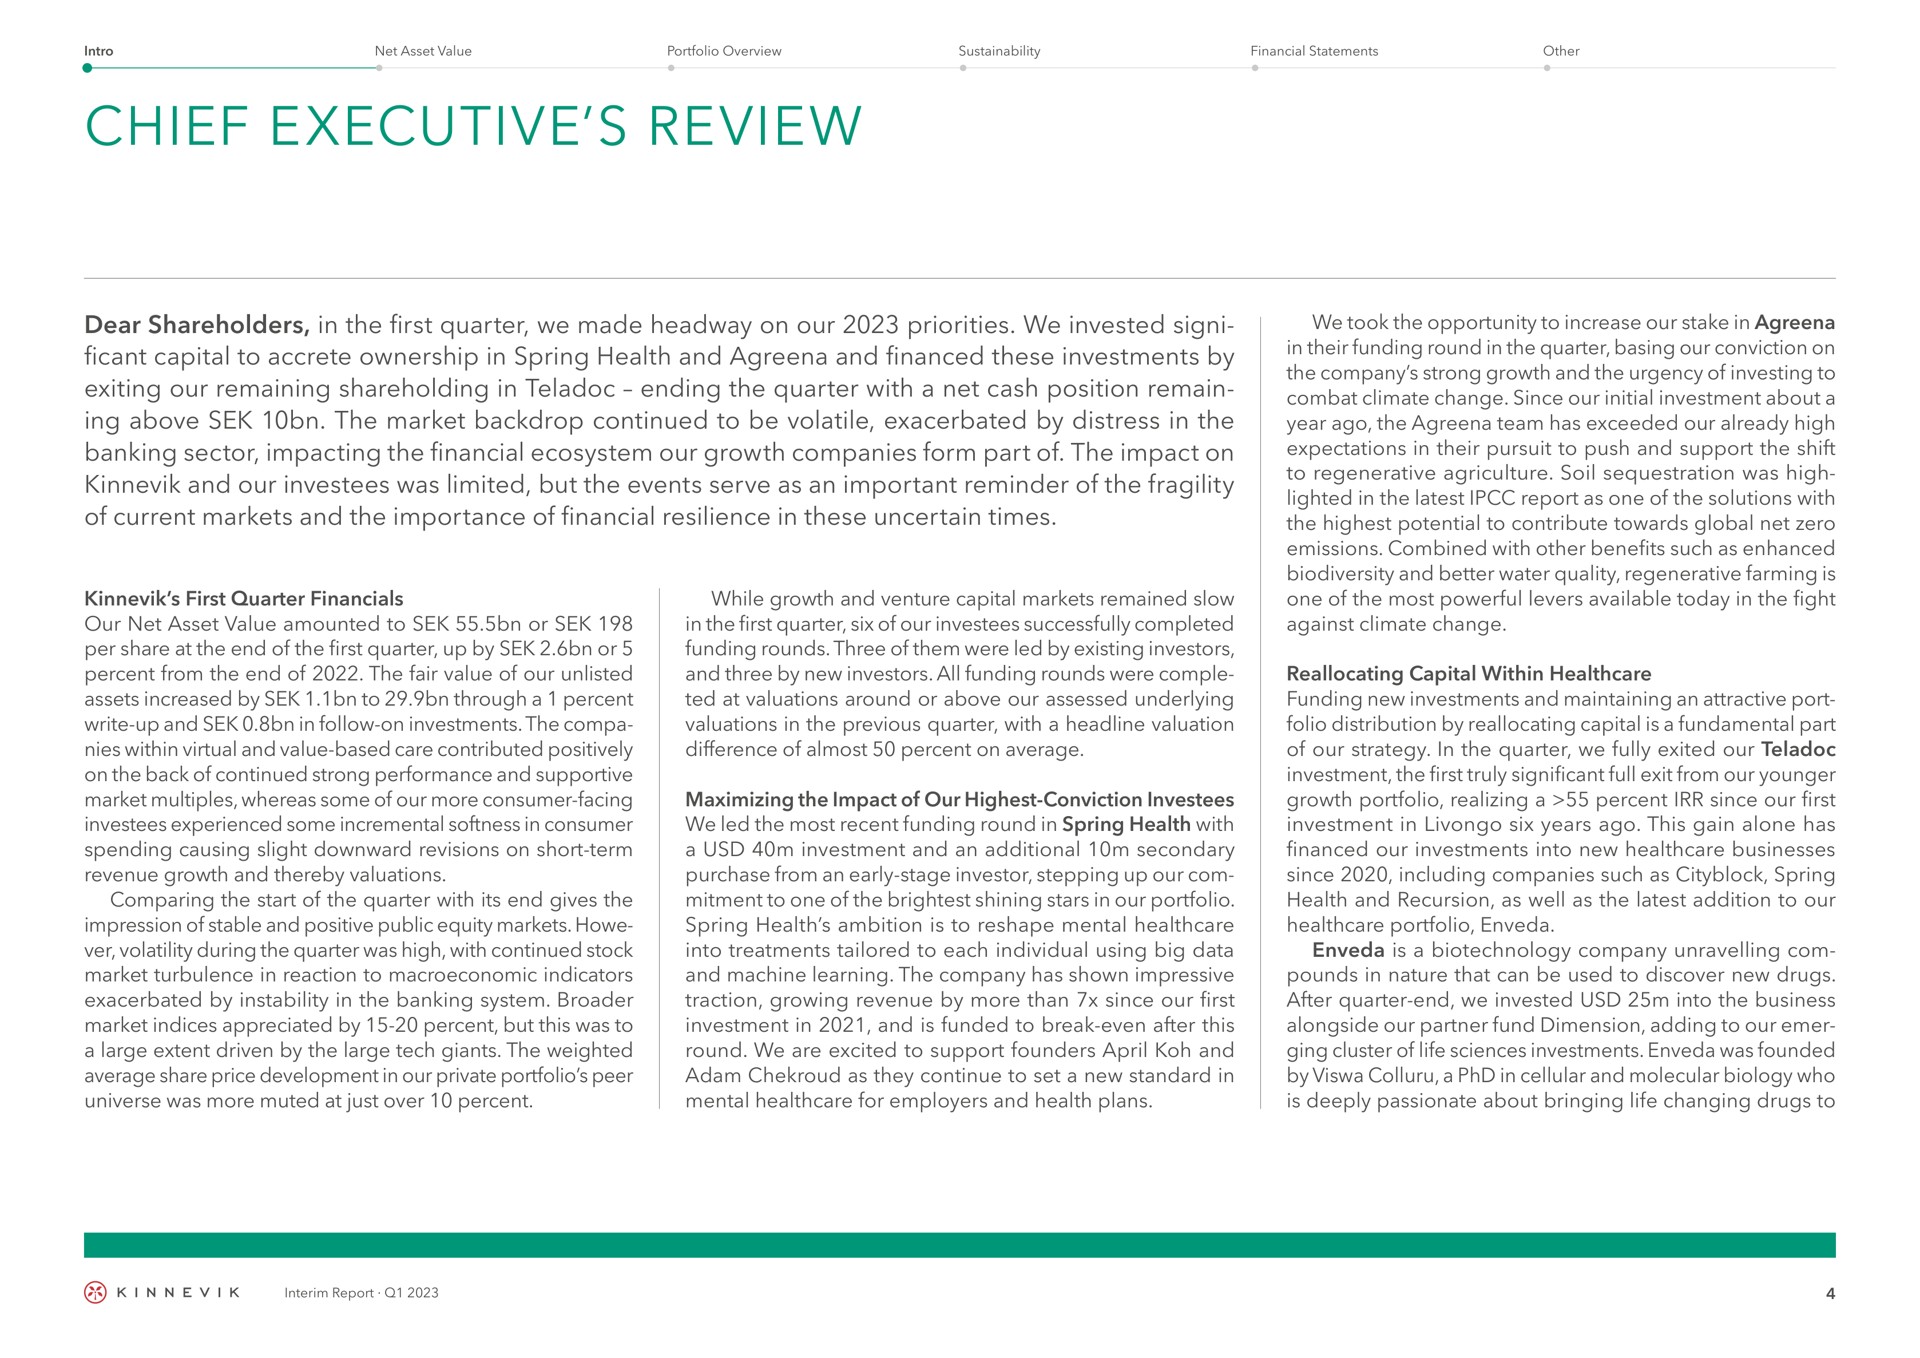 chief executive review dear shareholders in the first quarter we made headway on our priorities we invested capital to accrete ownership in spring health and and financed these investments by exiting our remaining in ending the quarter with a net cash position remain ing above the market backdrop continued to be volatile exacerbated by distress in the banking sector impacting the financial ecosystem our growth companies form part of the impact on and our was limited but the events serve as an important reminder of the fragility of current markets and the importance of financial resilience in these uncertain times first quarter our net asset value amounted to or per share at the end of the first quarter up by or percent from the end of the fair value of our unlisted assets increased by to through a percent write up and in follow on investments the within virtual and value based care contributed positively on the back of continued strong performance and supportive market multiples whereas some of our more consumer facing experienced some incremental softness in consumer spending causing slight downward revisions on short term revenue growth and thereby valuations comparing the start of the quarter with its end gives the impression of stable and positive public equity markets howe volatility during the quarter was high with continued stock market turbulence in reaction to indicators exacerbated by instability in the banking system market indices appreciated by percent but this was to a large extent driven by the large tech giants the weighted average share price development in our private portfolio peer universe was more muted at just over percent while growth and venture capital markets remained slow in the first quarter six of our successfully completed funding rounds three of them were led by existing investors and three by new investors all funding rounds were ted at valuations around or above our assessed underlying valuations in the previous quarter with a headline valuation difference of almost percent on average maximizing the impact of our highest conviction we led the most recent funding round in spring health with a investment and an additional secondary purchase from an early stage investor stepping up our to one of the shining stars in our portfolio spring health ambition is to reshape mental into treatments tailored to each individual using big data and machine learning the company has shown impressive traction growing revenue by more than since our first investment in and is funded to break even after this round we are excited to support founders and as they continue to set a new standard in mental for employers and health plans we took the opportunity to increase our stake in in their funding round in the quarter basing our conviction on the company strong growth and the urgency of investing to combat climate change since our initial investment about a year ago the team has exceeded our already high expectations in their pursuit to push and support the shift to regenerative agriculture soil sequestration was high lighted in the latest report as one of the solutions with the highest potential to contribute towards global net zero emissions combined with other benefits such as enhanced and better water quality regenerative farming is one of the most powerful levers available today in the fight against climate change reallocating capital within funding new investments and maintaining an attractive port folio distribution by reallocating capital is a fundamental part of our strategy in the quarter we fully exited our investment the first truly significant full exit from our younger growth portfolio realizing a percent since our first investment in six years ago this gain alone has financed our investments into new businesses since including companies such as spring health and recursion as well as the latest addition to our portfolio is a company unravelling pounds in nature that can be used to discover new drugs after quarter end we invested into the business alongside our partner fund dimension adding to our ging cluster of life sciences investments was founded by a in cellular and molecular biology who is deeply passionate about bringing life changing drugs to | Kinnevik